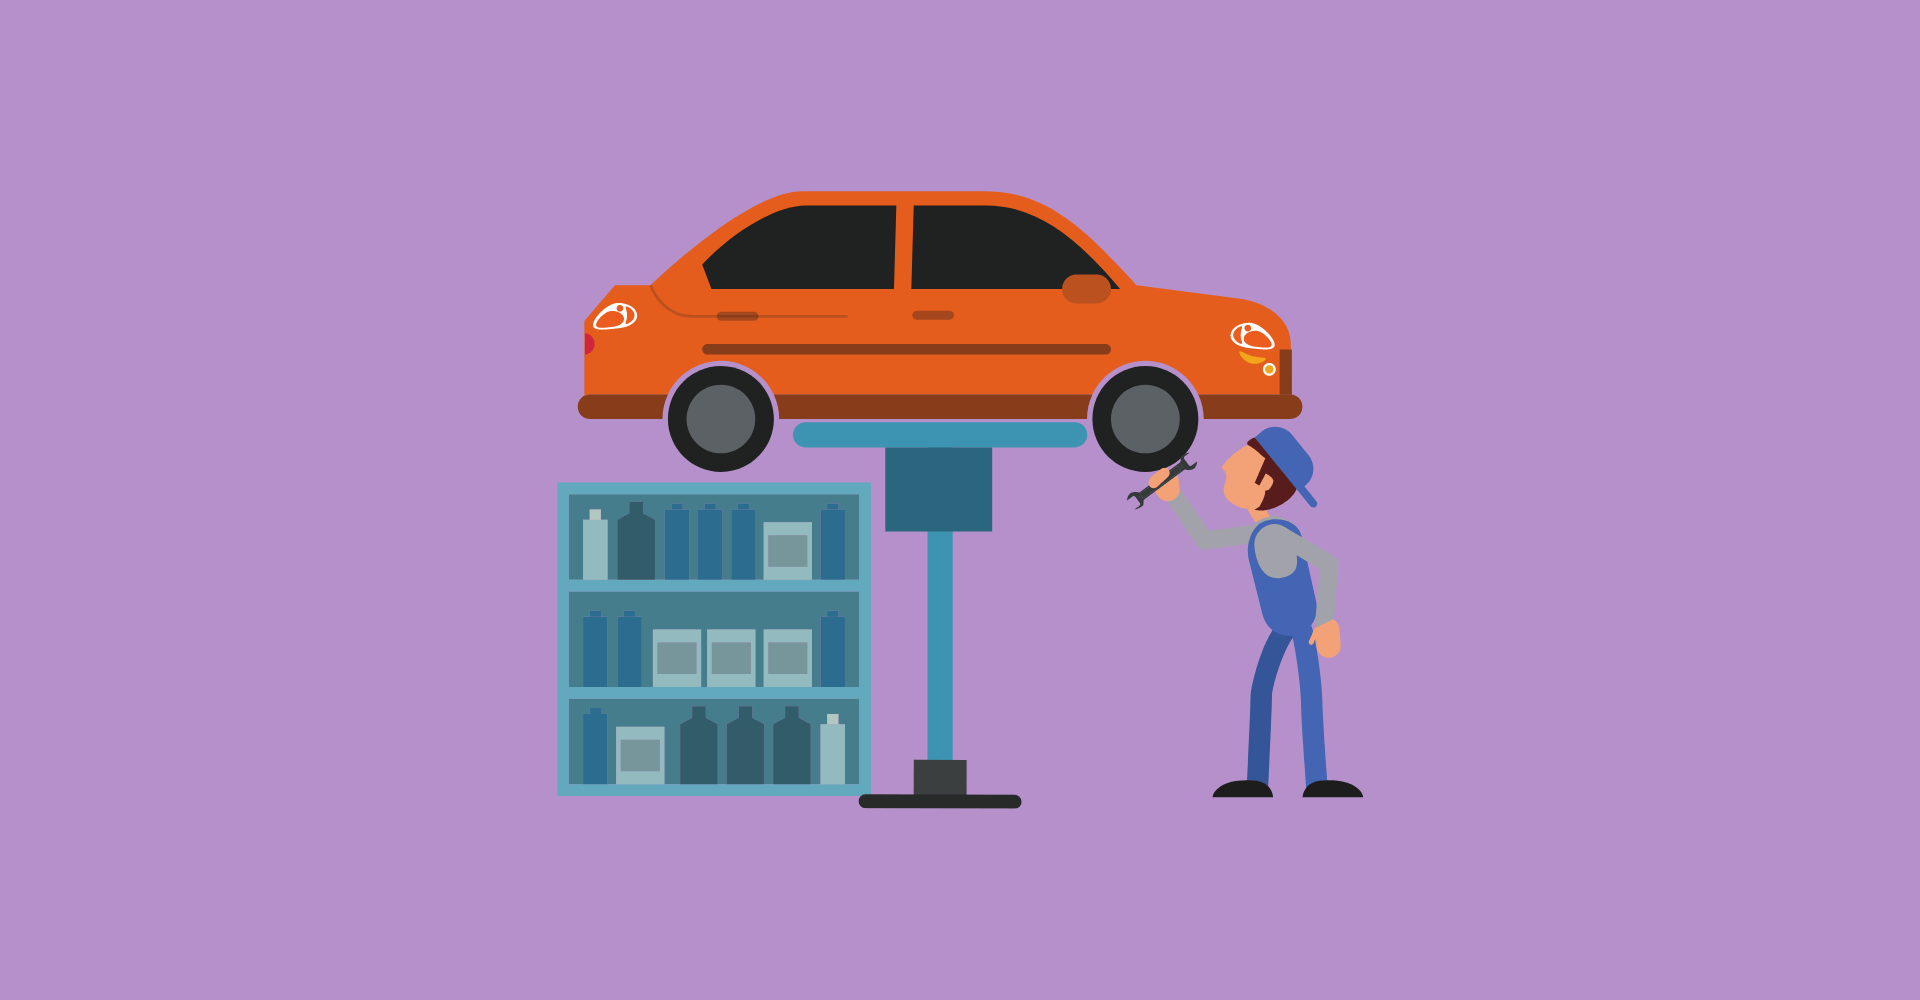 illustrated mechanic working on orange car with tools on purple background for mechanic gift guide article